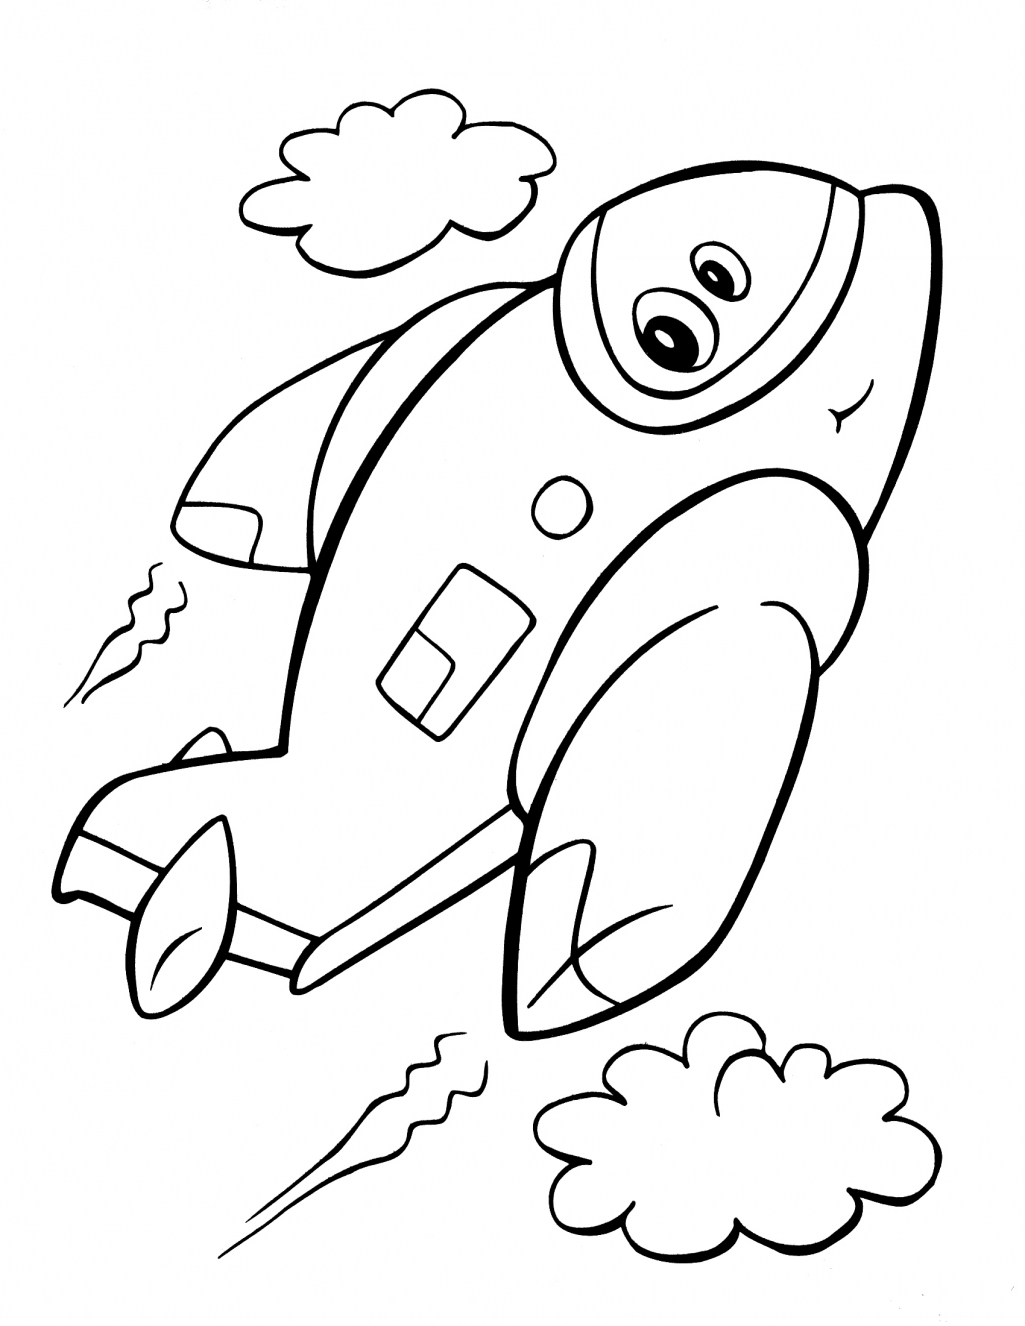 Convert Pictures To Coloring Pages Collection Convert Pictures To Coloring Pages Pictures